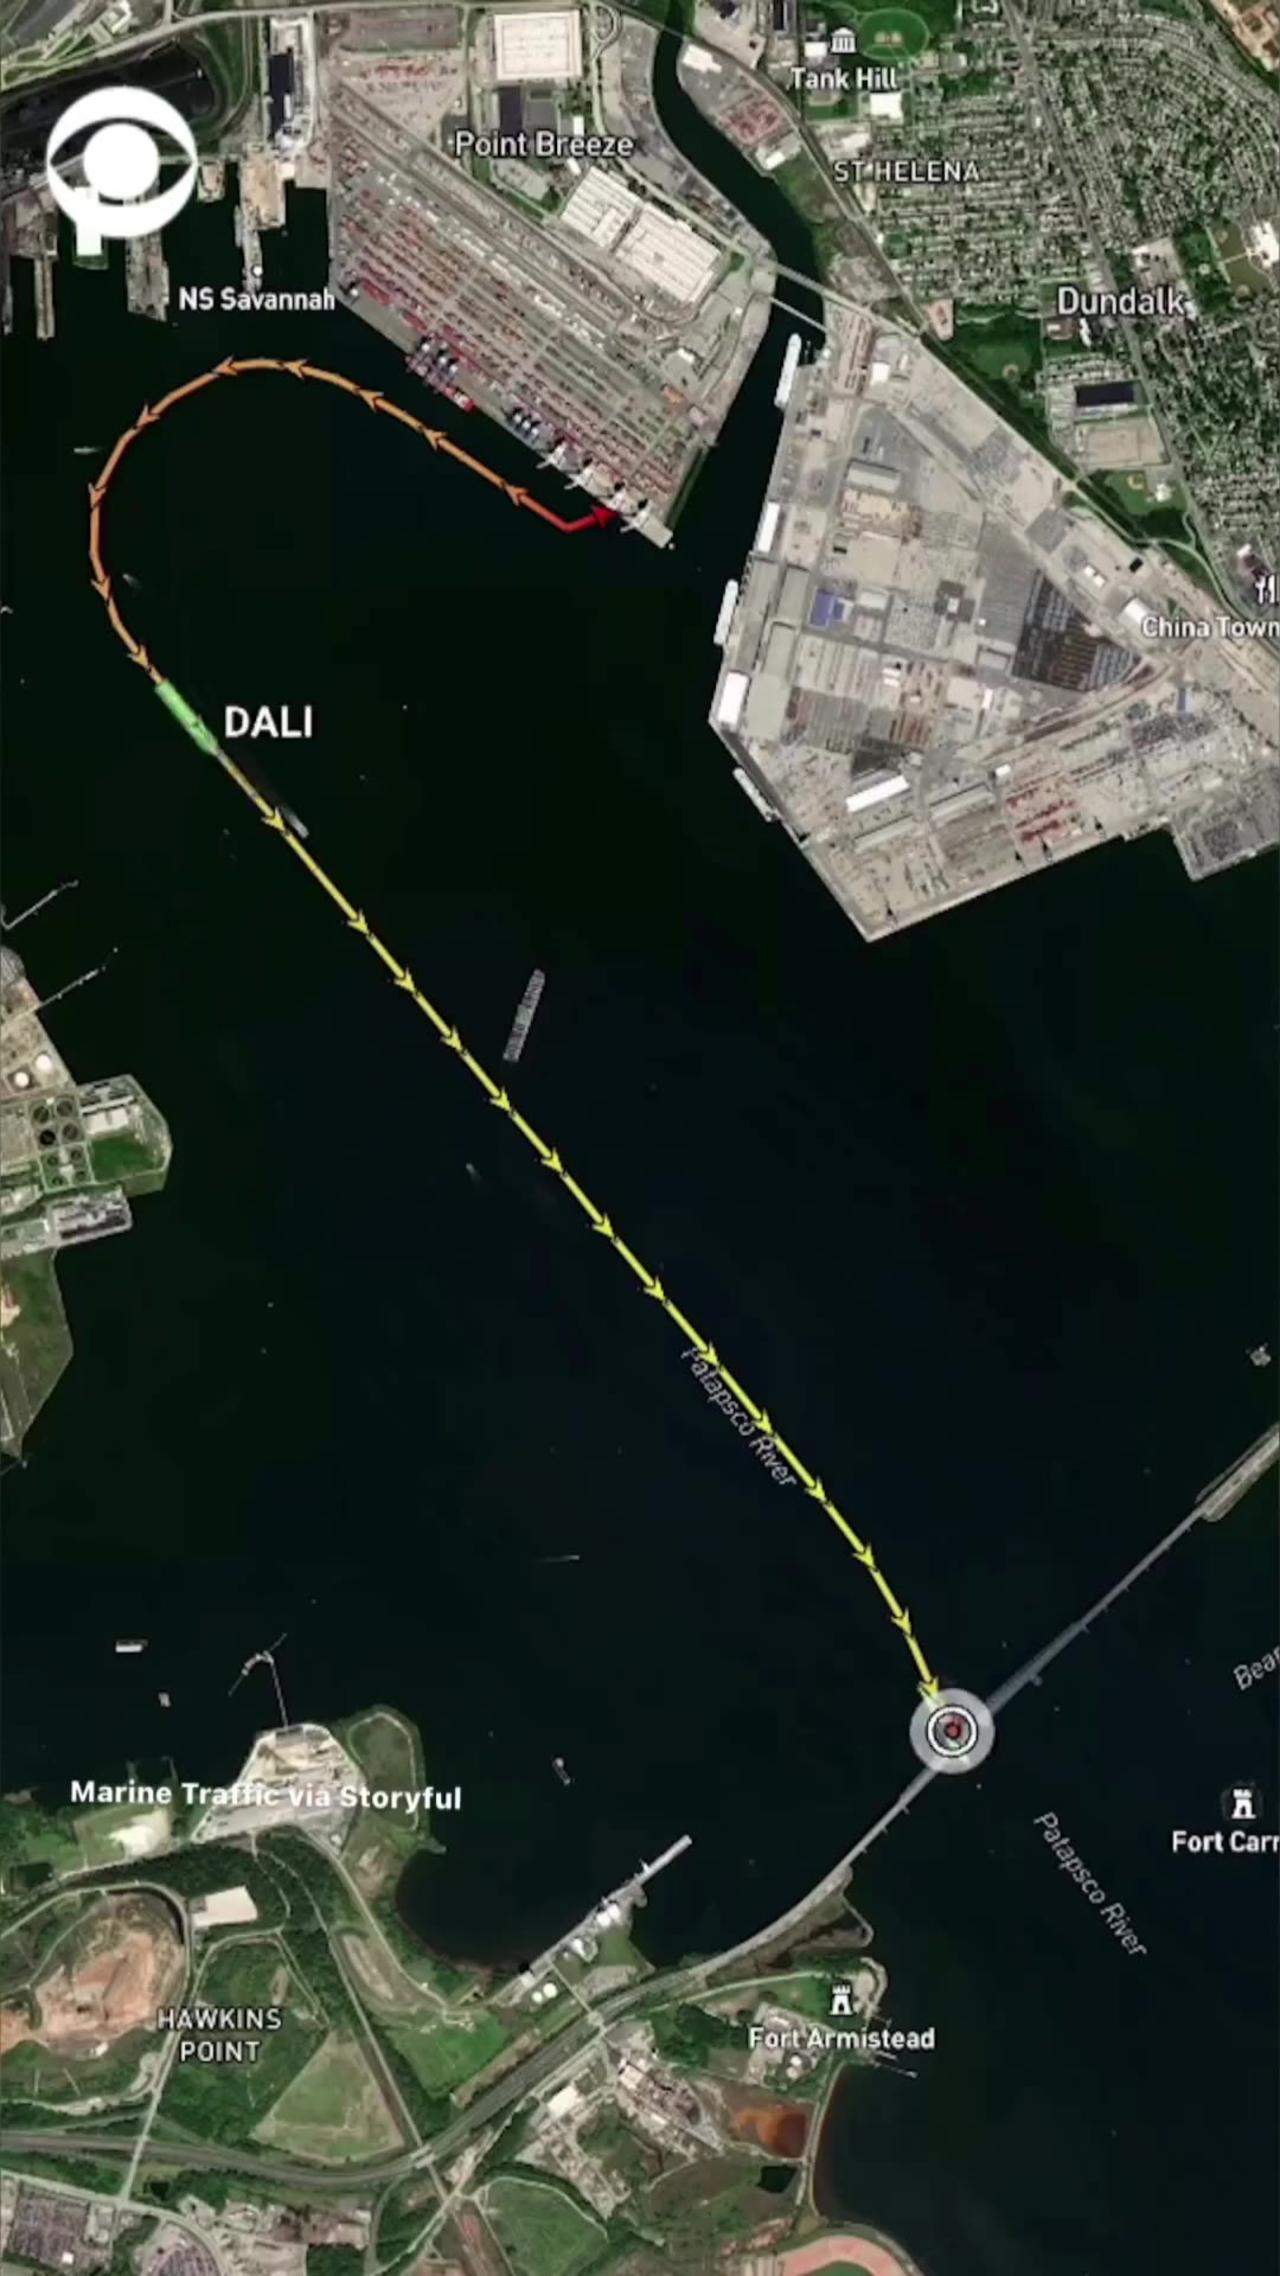 This animation shows the movements of the Dali cargo ship before it collided